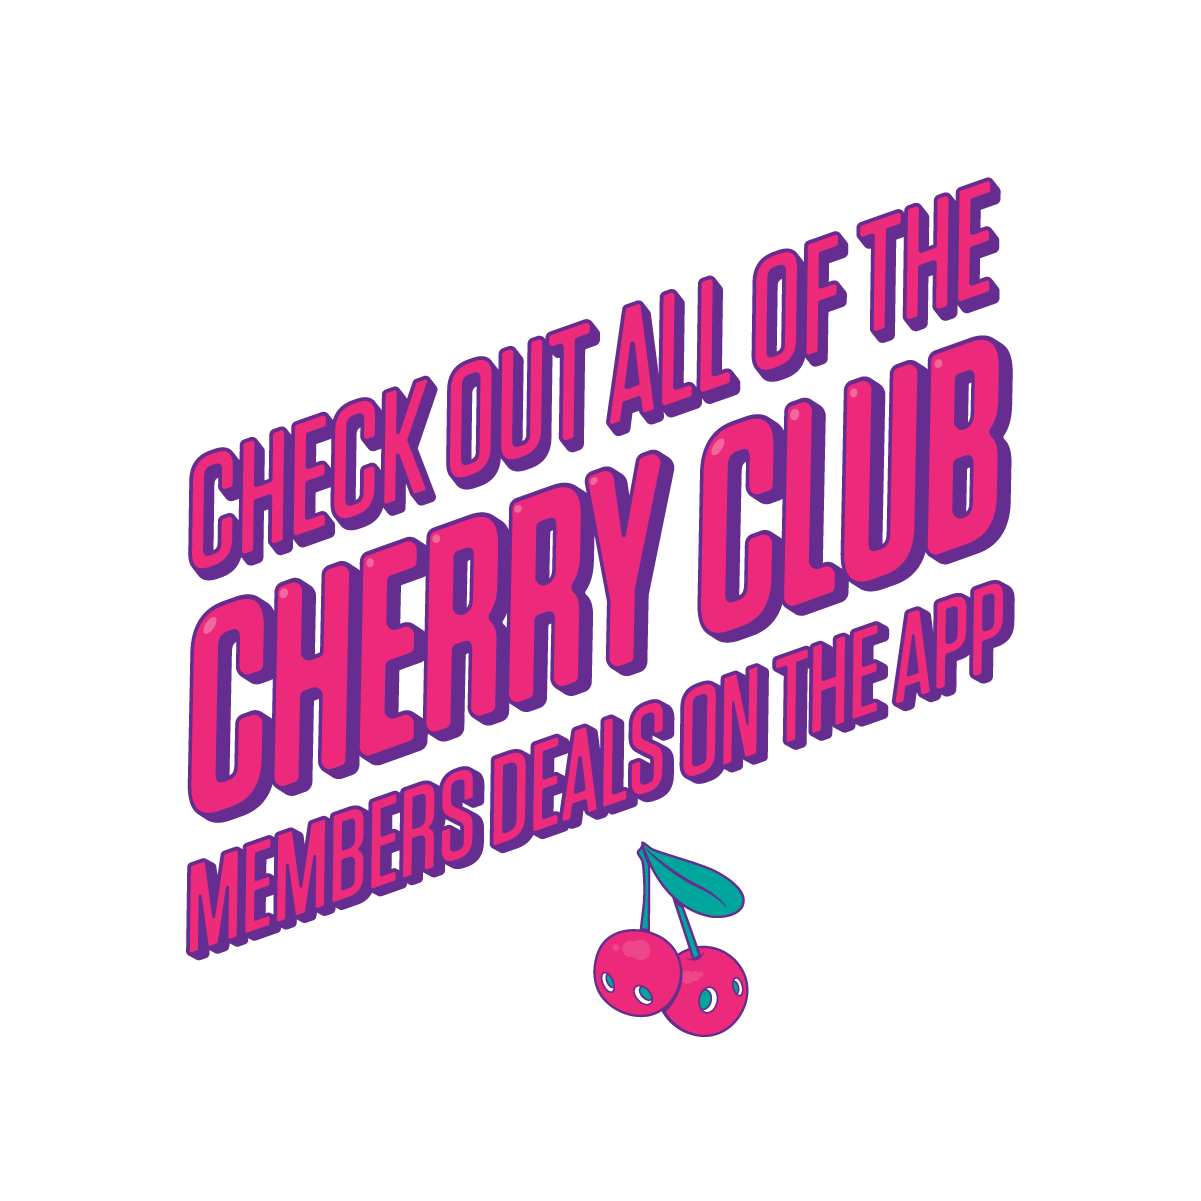 Check out the Cherry Club